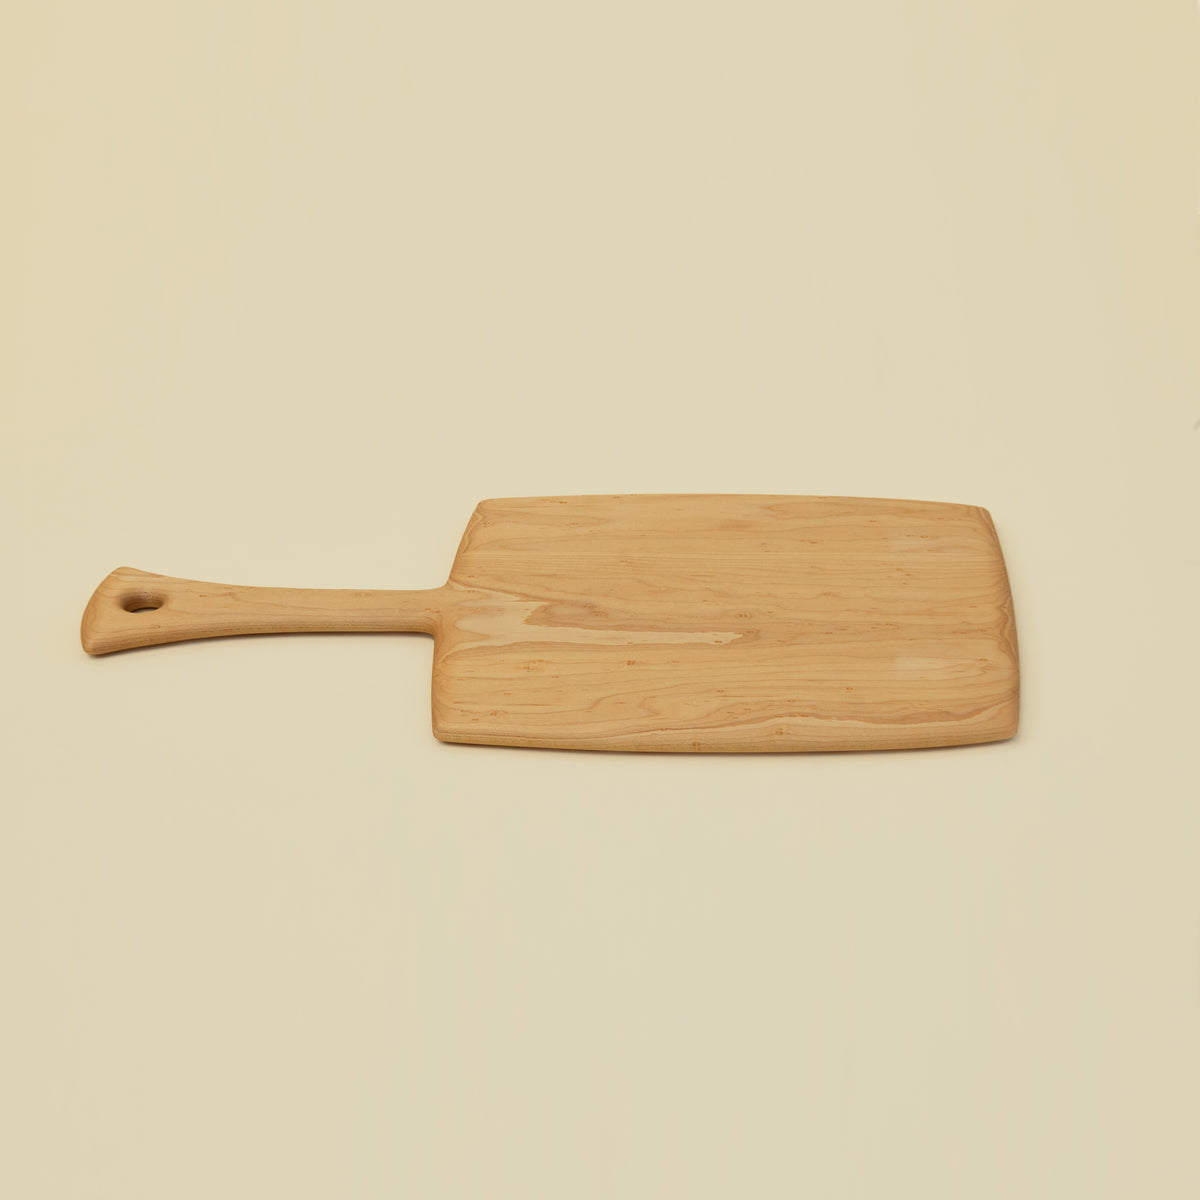 Maple Cutting Board with Handle - 7.75 x 15.5